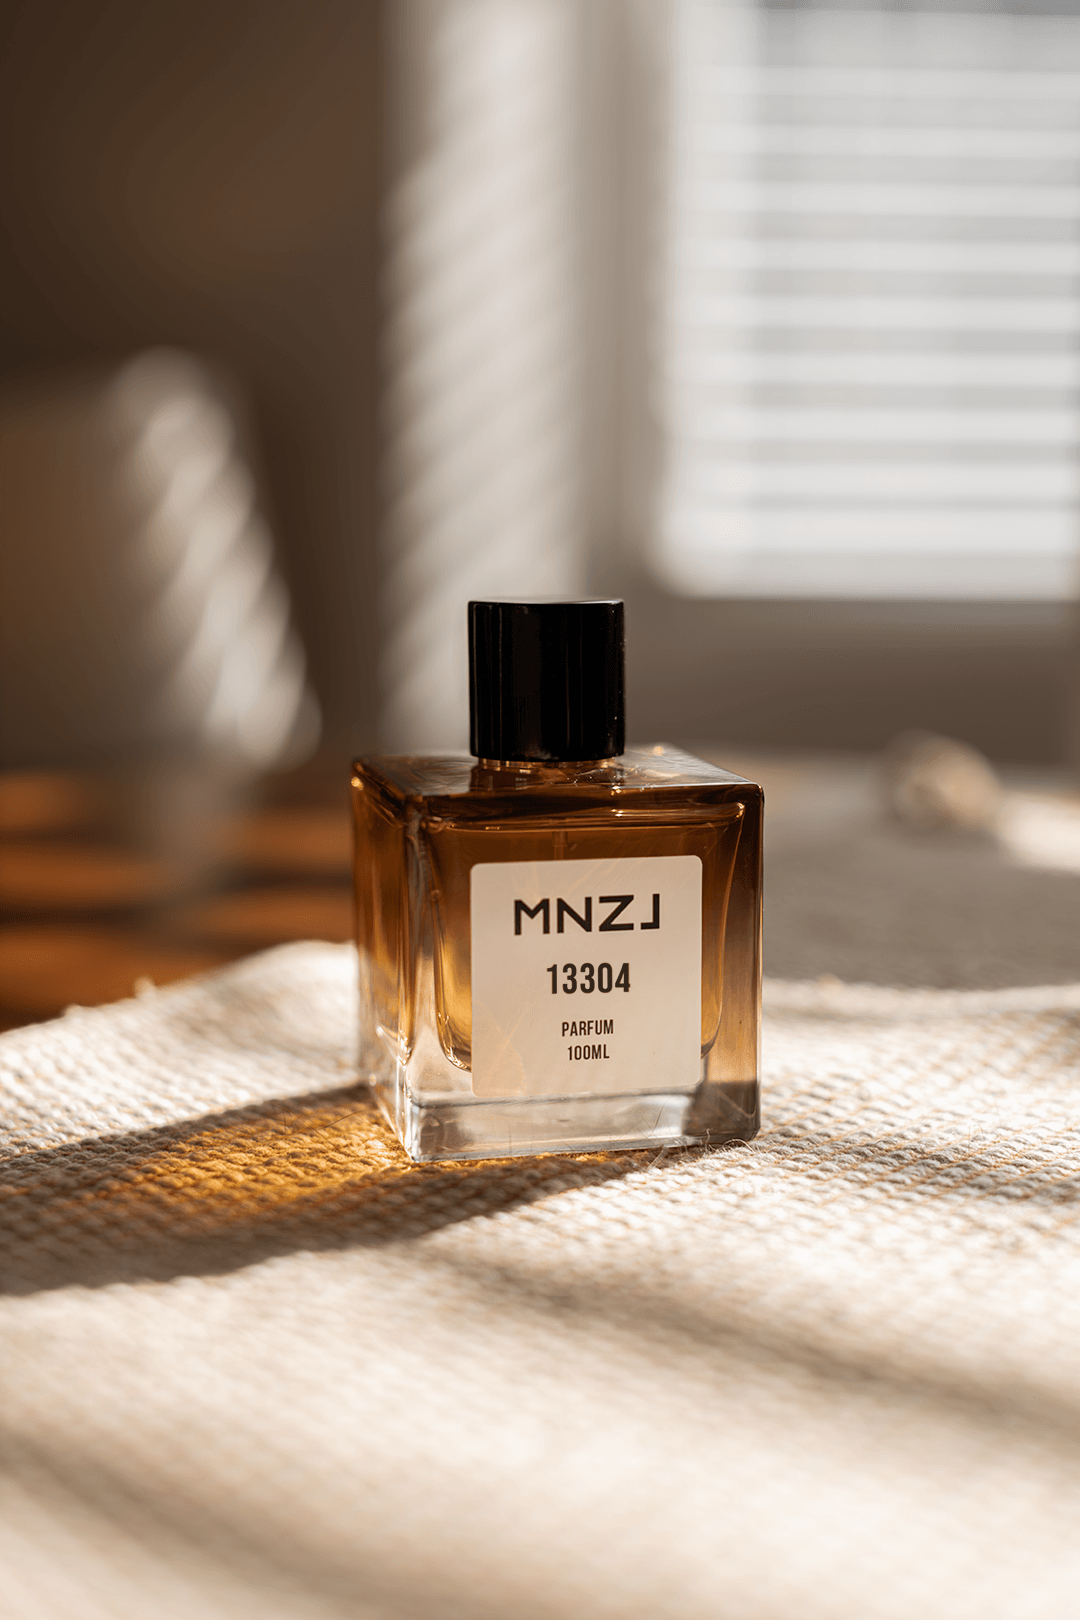 13304, Inspired by Chanel: Sycomore Les Exclusifs De Chanel – MNZL